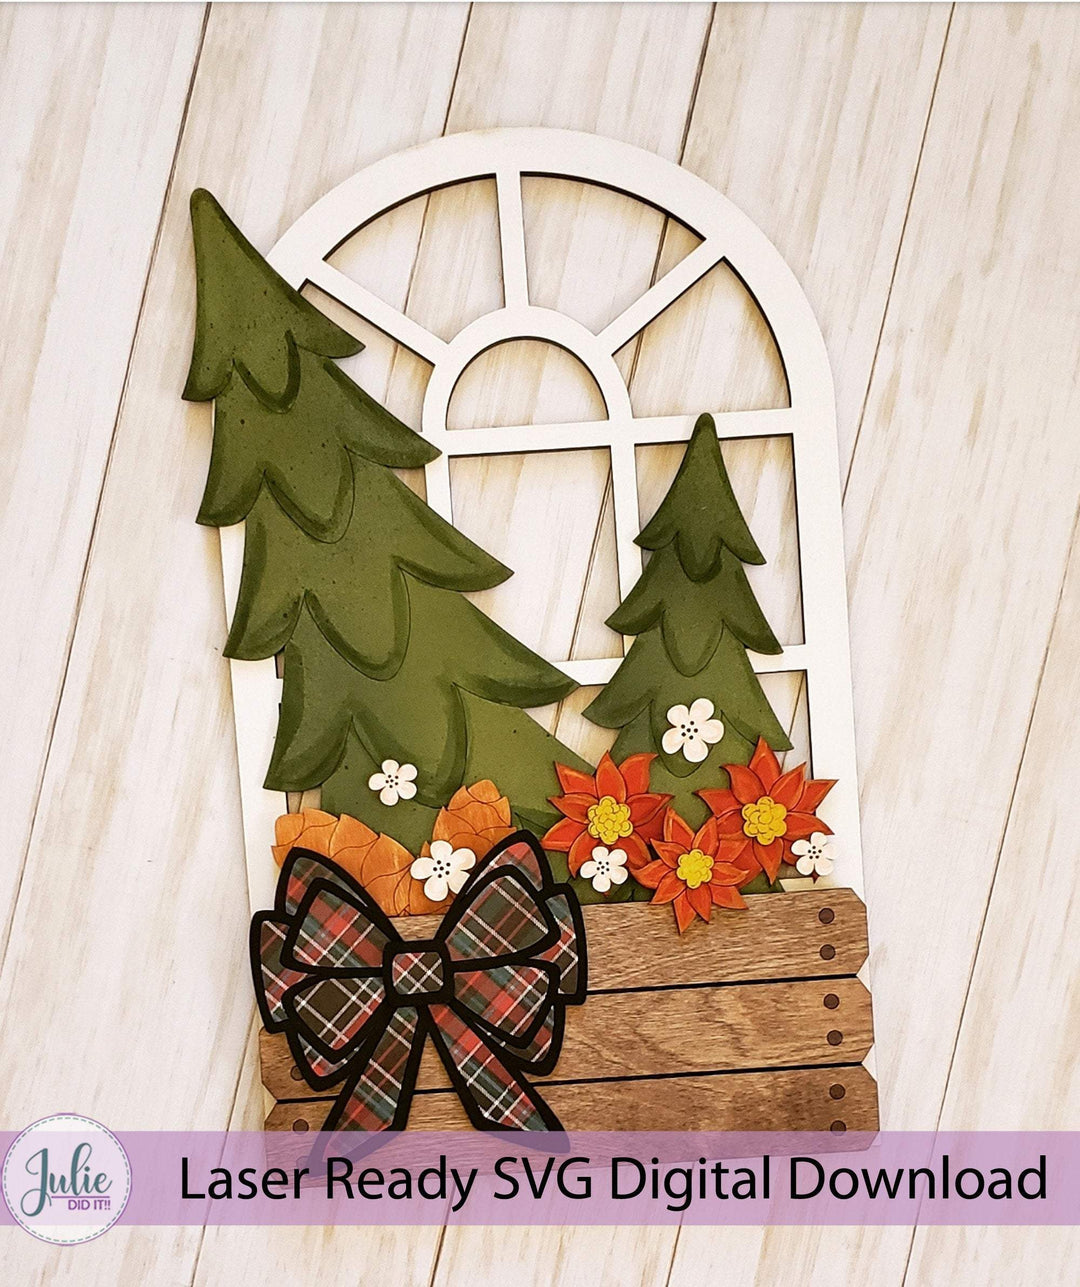 Julie Did It Studios window box SVG Christmas Tree Insert for the Window Box Interchangeable Sign